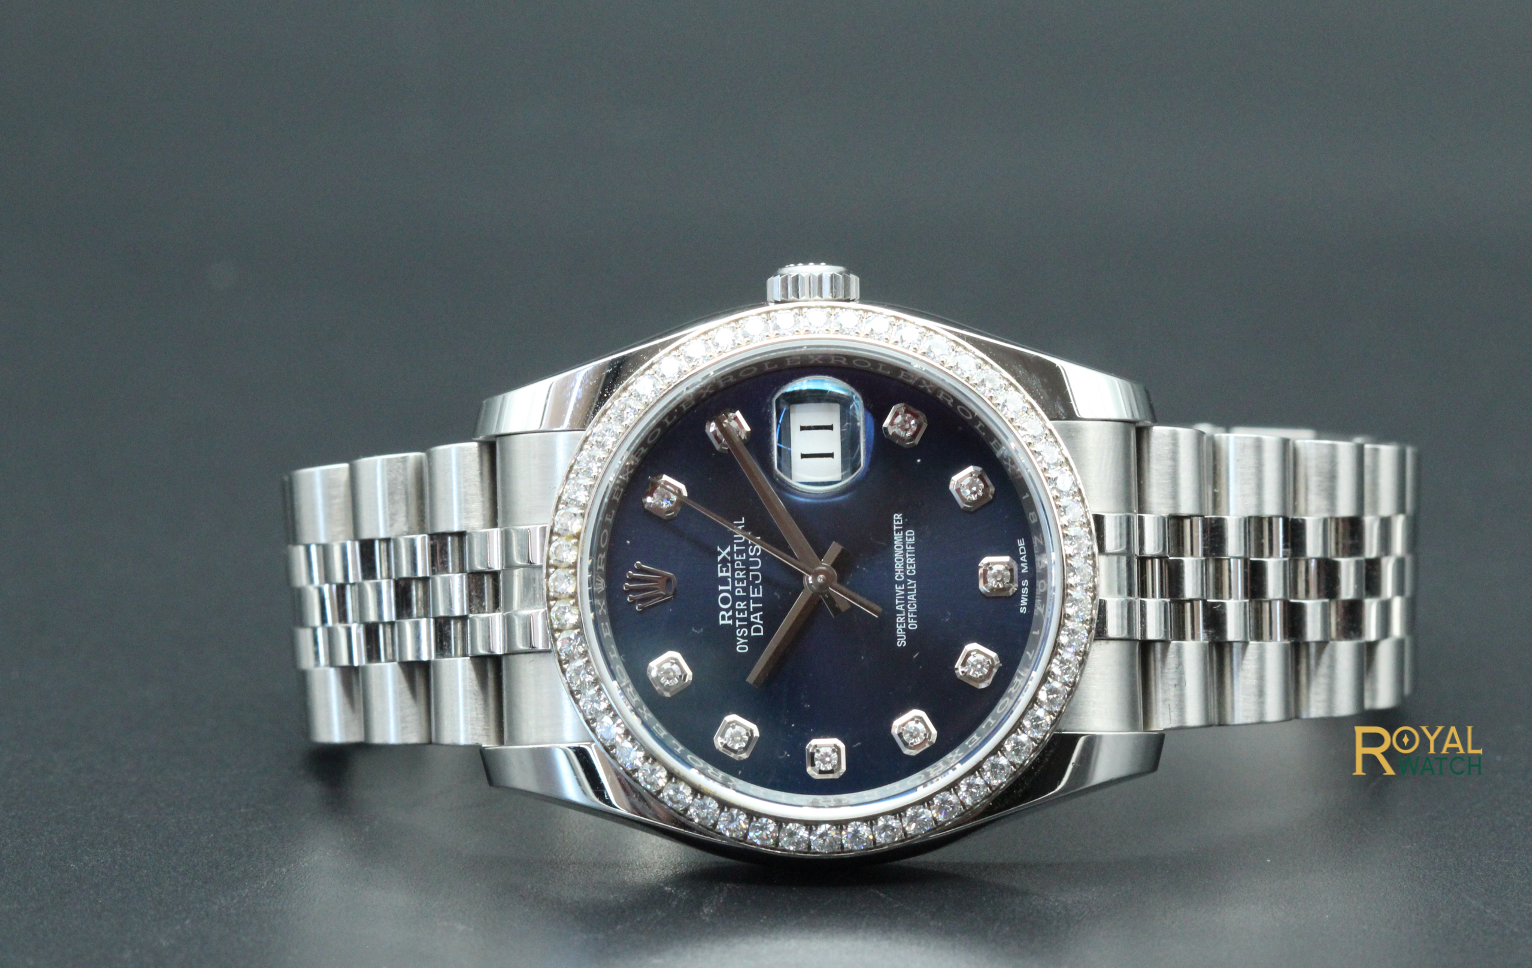 Rolex Datejust 36 (Pre-Owned)